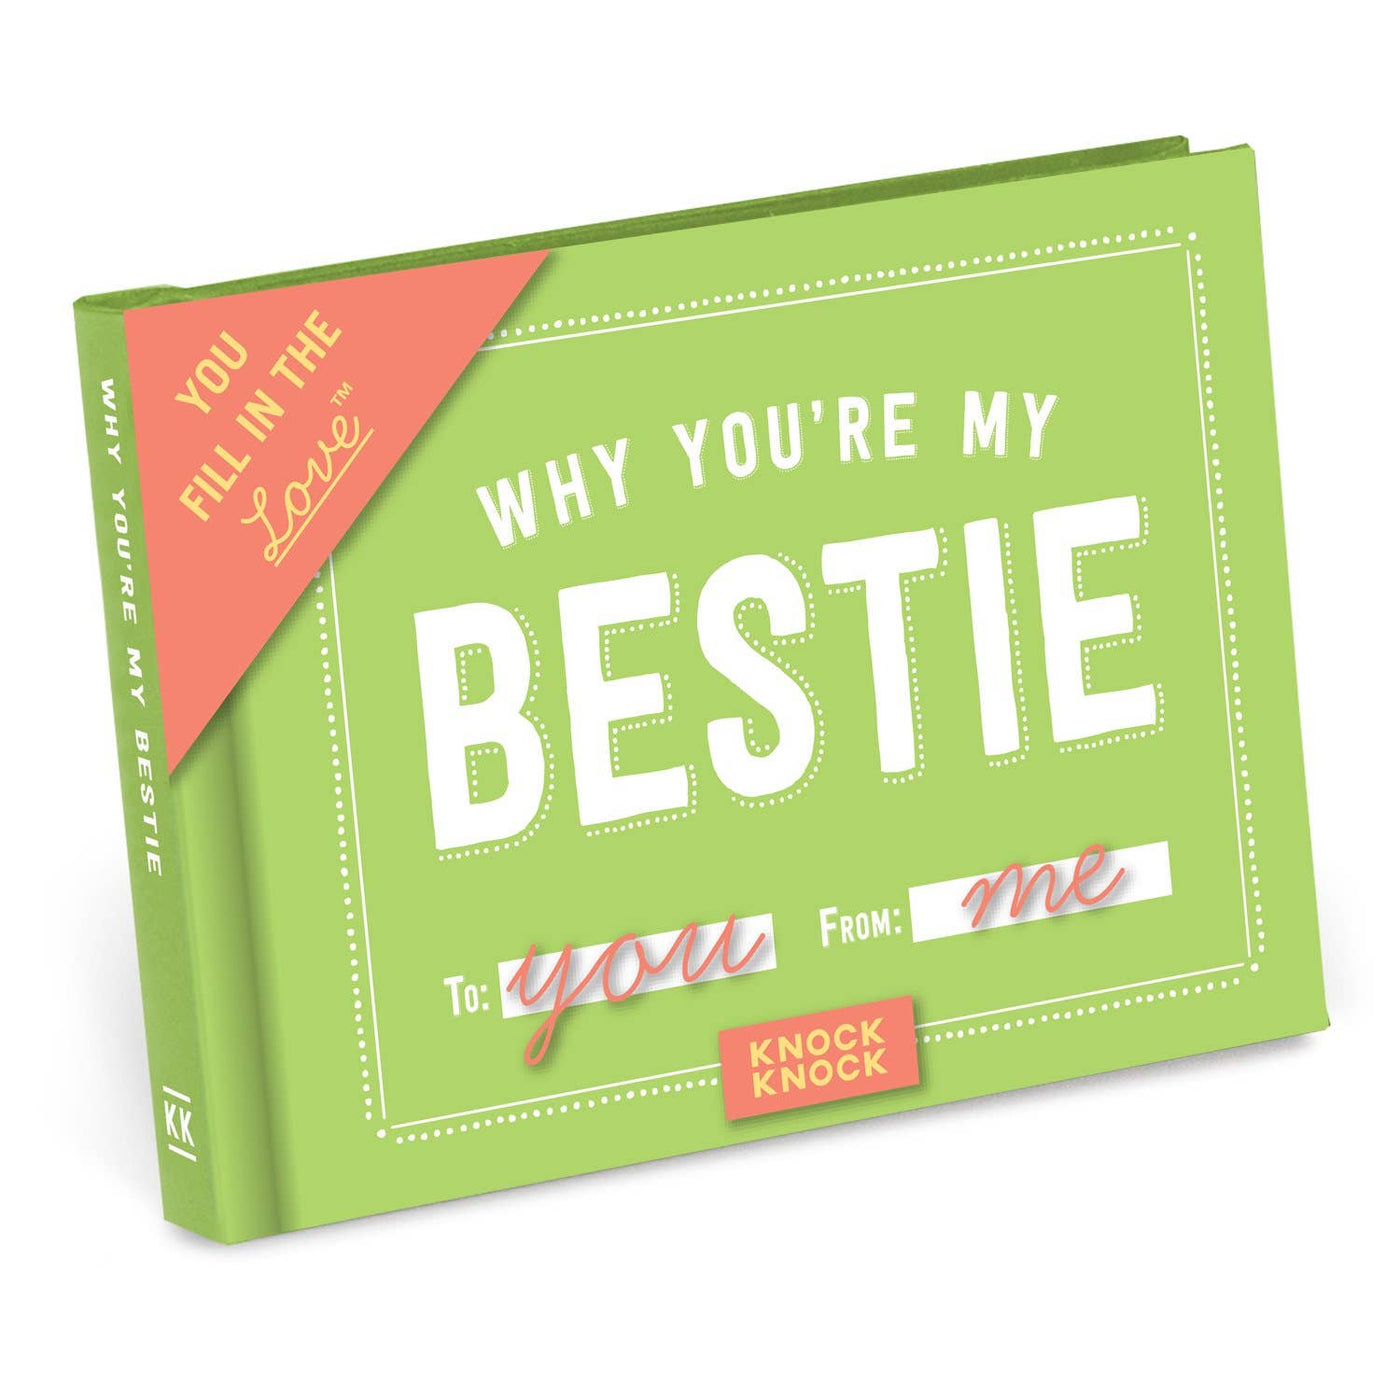 Why You're My Bestie Fill in the Love Gift Book | Atlas Stationers.